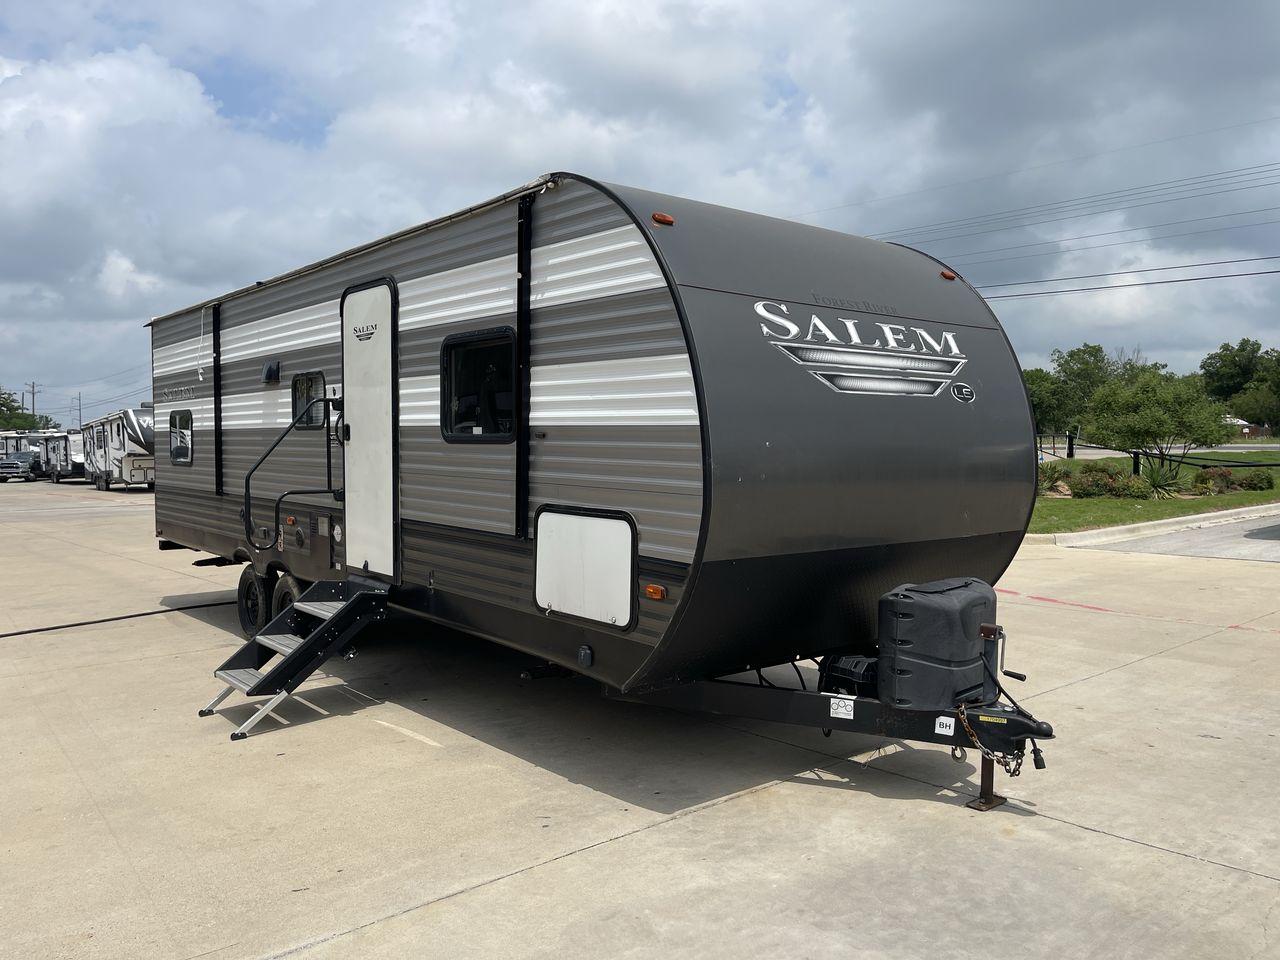 2019 FOREST RIVER SALEM 26DBLE (4X4TSMB23KA) , Slides: 1 transmission, located at 4319 N Main St, Cleburne, TX, 76033, (817) 678-5133, 32.385960, -97.391212 - This 2019 Forest River Salem 26DBLE is a single-slide travel trailer that offers sleeping space for up to 10 people! This Salem is designed with a straightforward and convenient floorplan featuring a front bedroom, central living and kitchen, and rear bunk and bath. The front bedroom can accommod - Photo #23